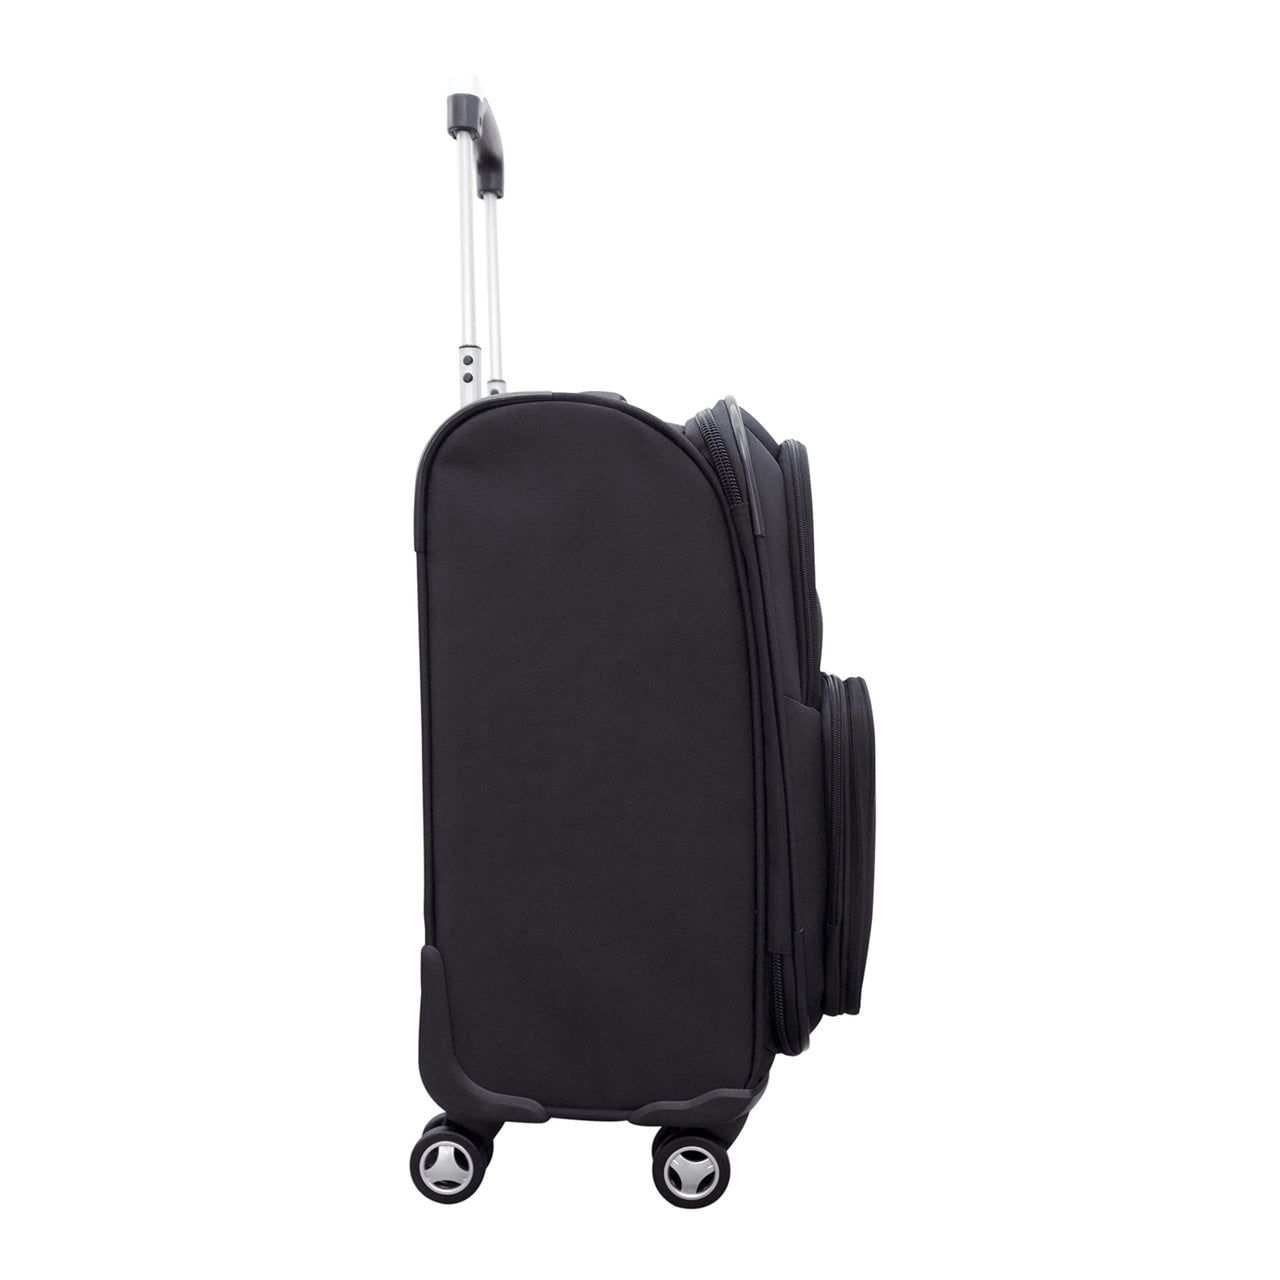 Los angeles Chargers 21" Softsided Luggage Carry-on Spinner in Black